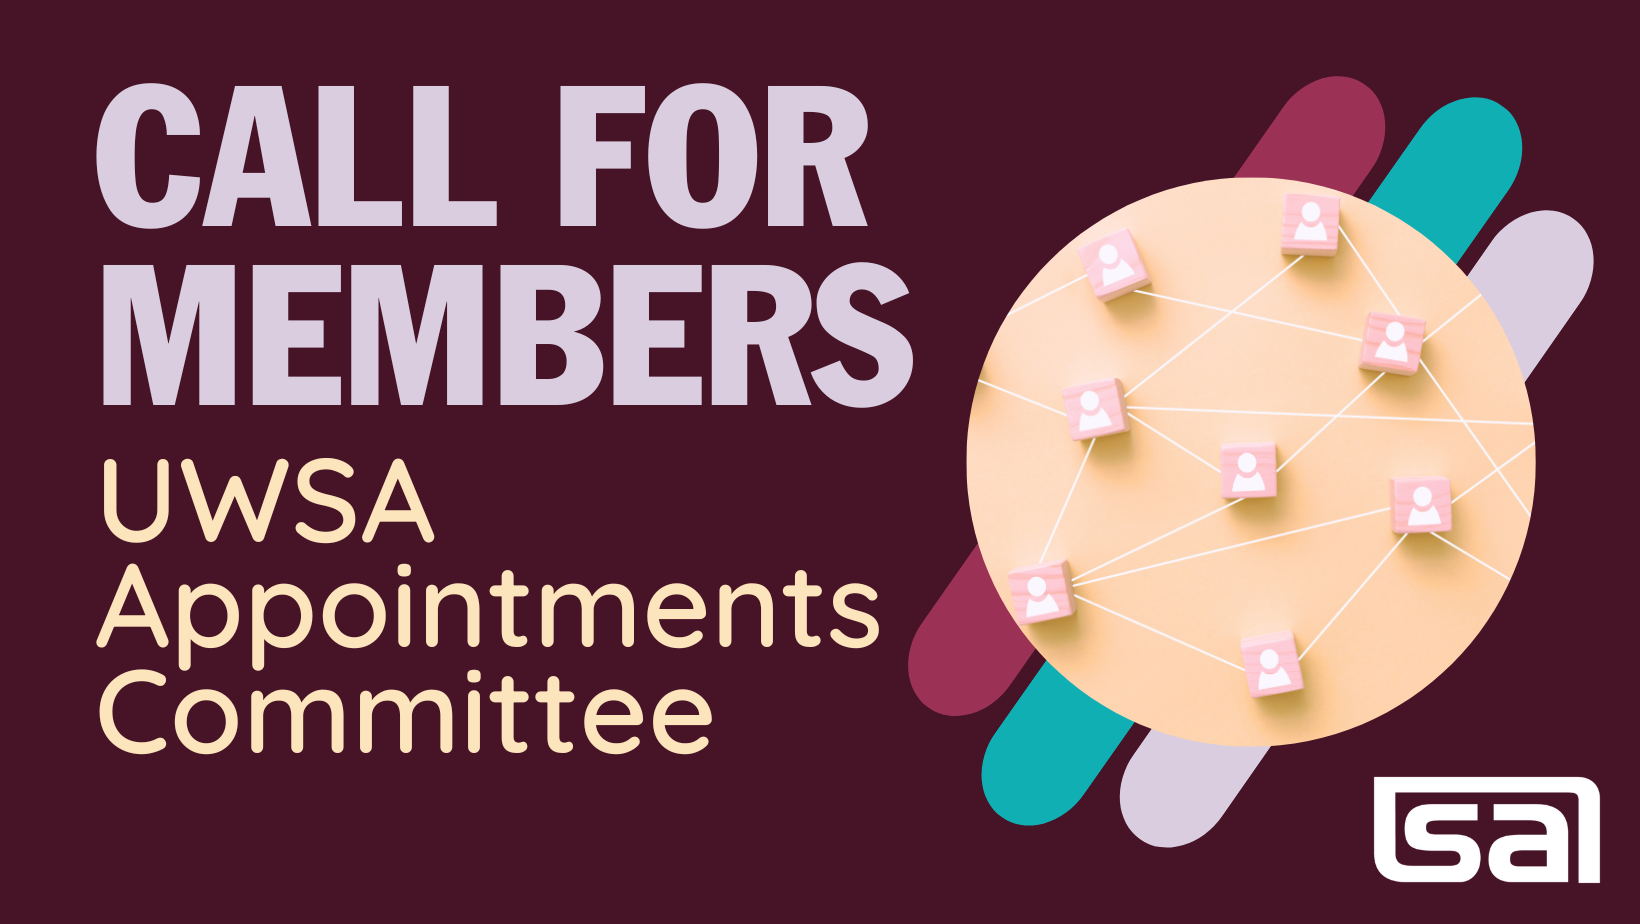 Call for members: UWSA Appointments Committee